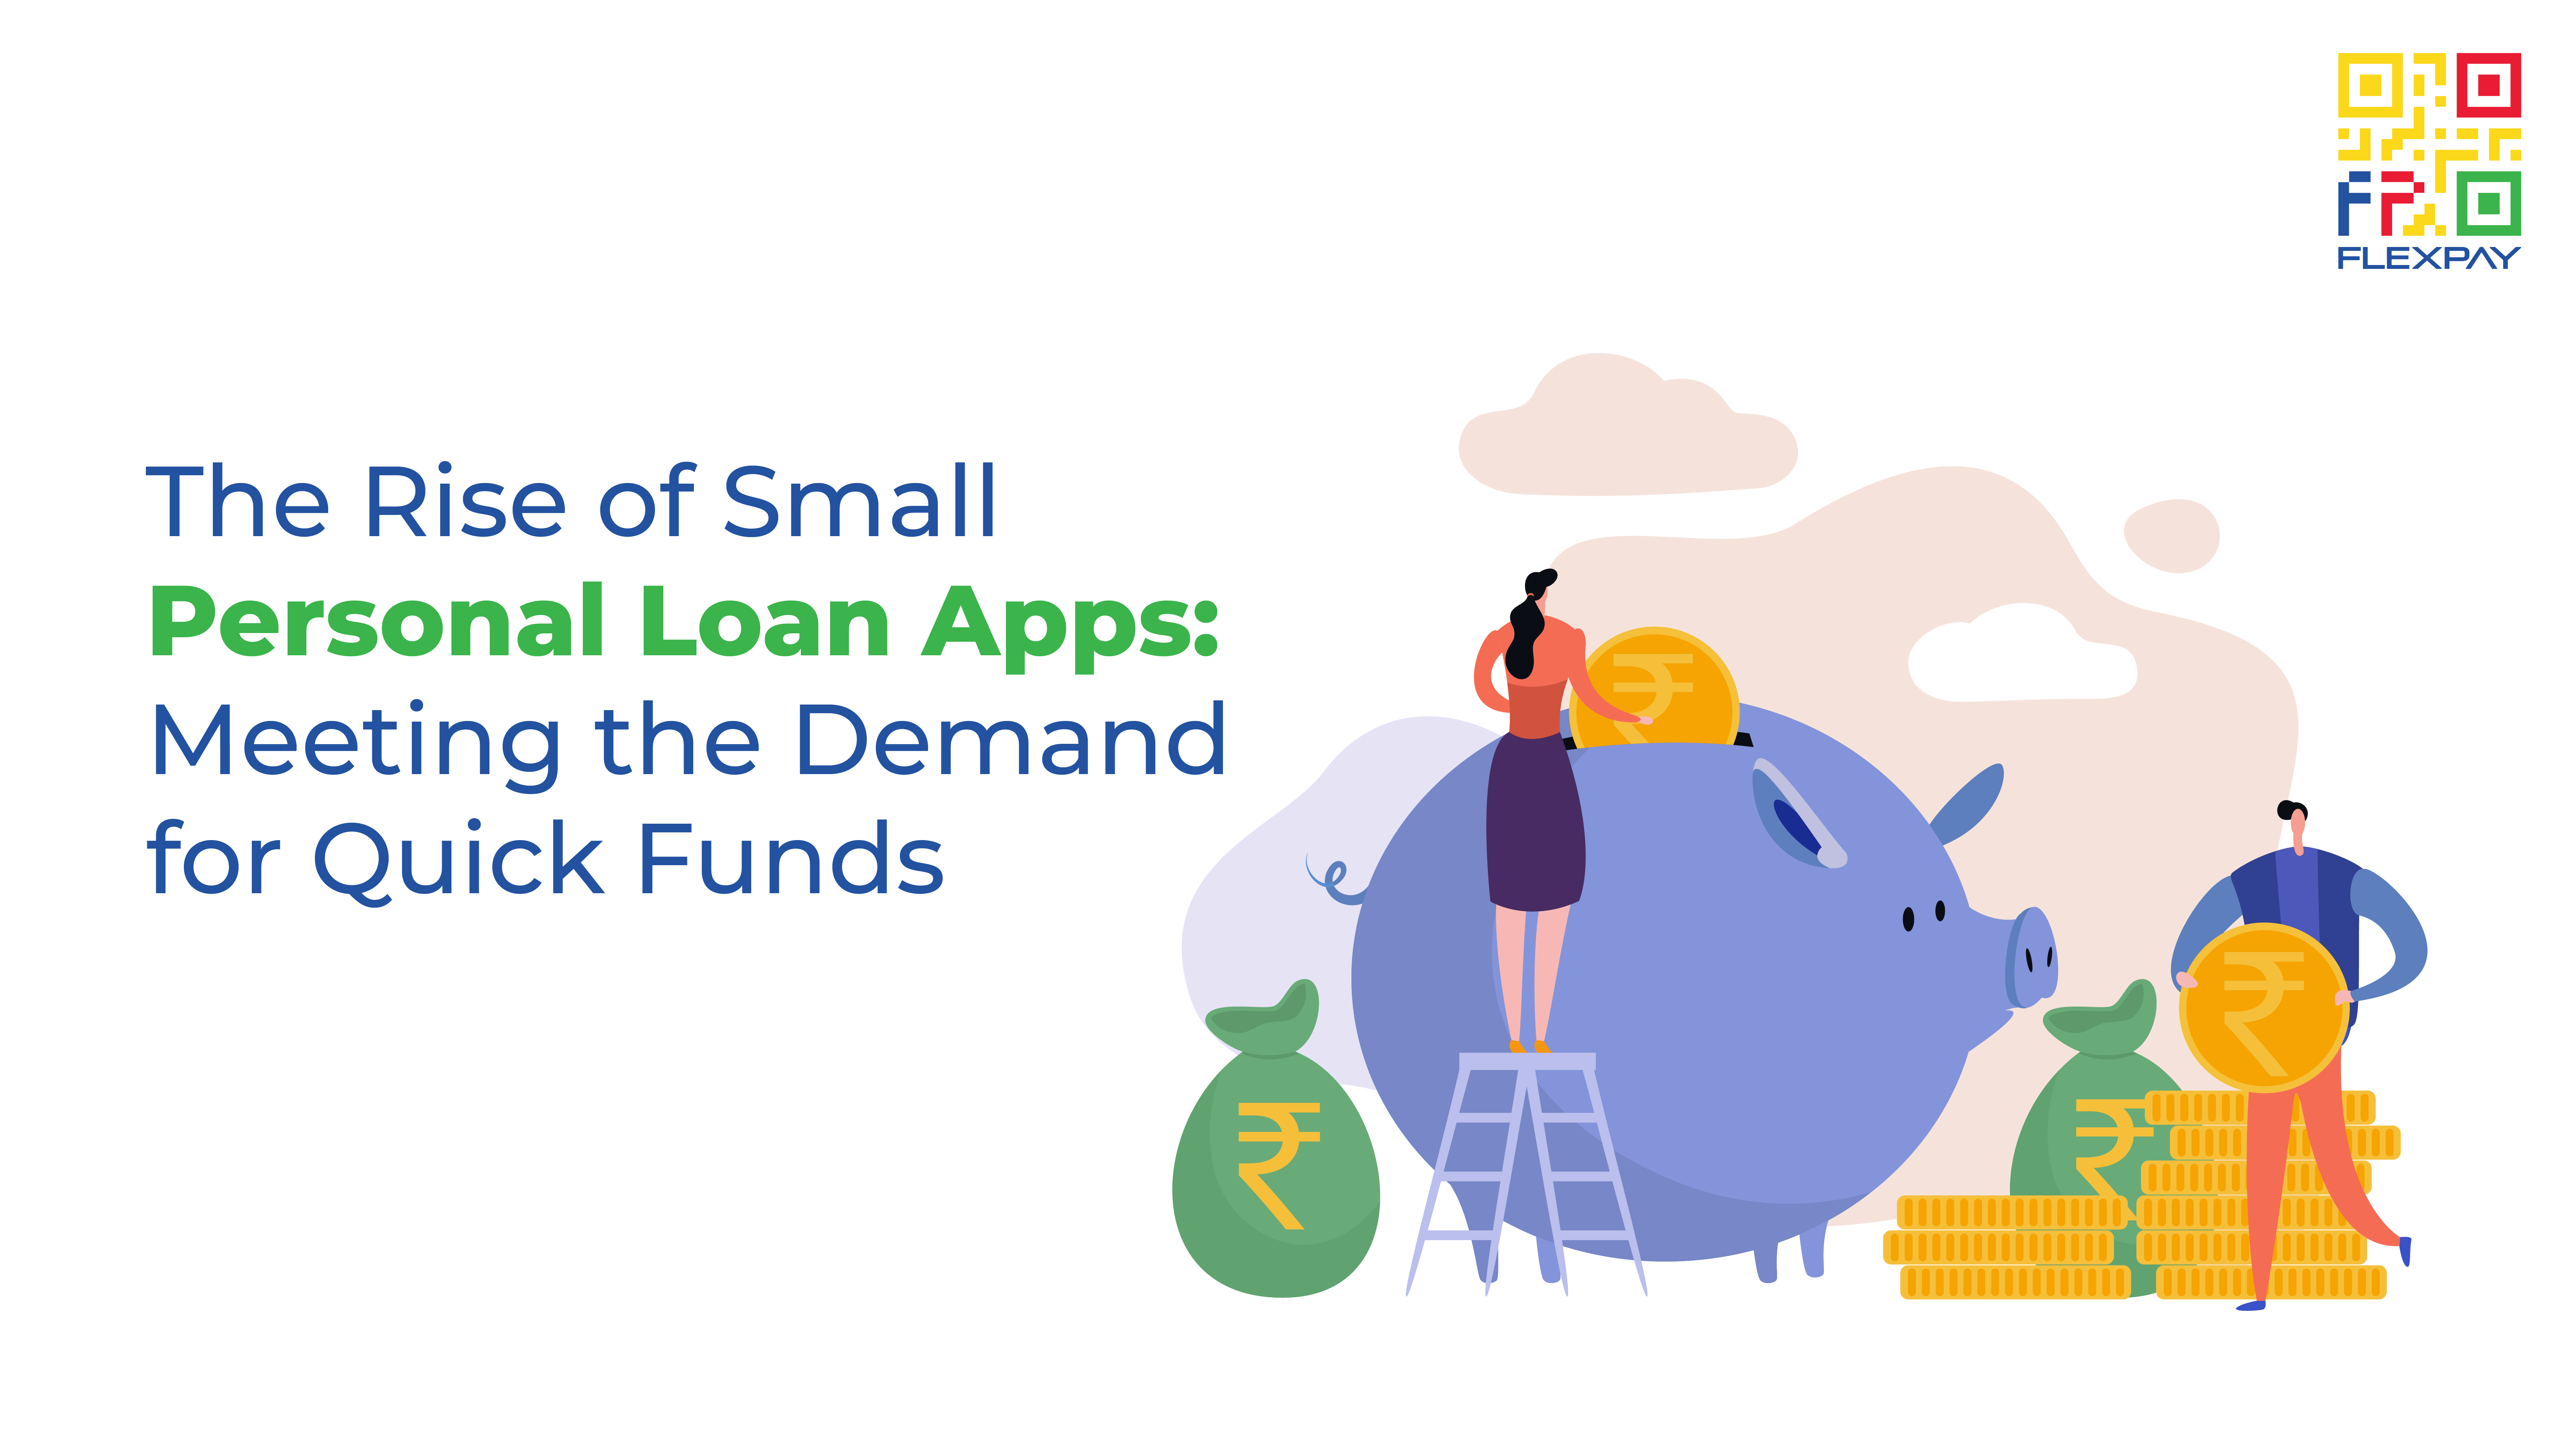 The Rise of Small Personal Loan Apps: Meeting the Demand for Quick Funds